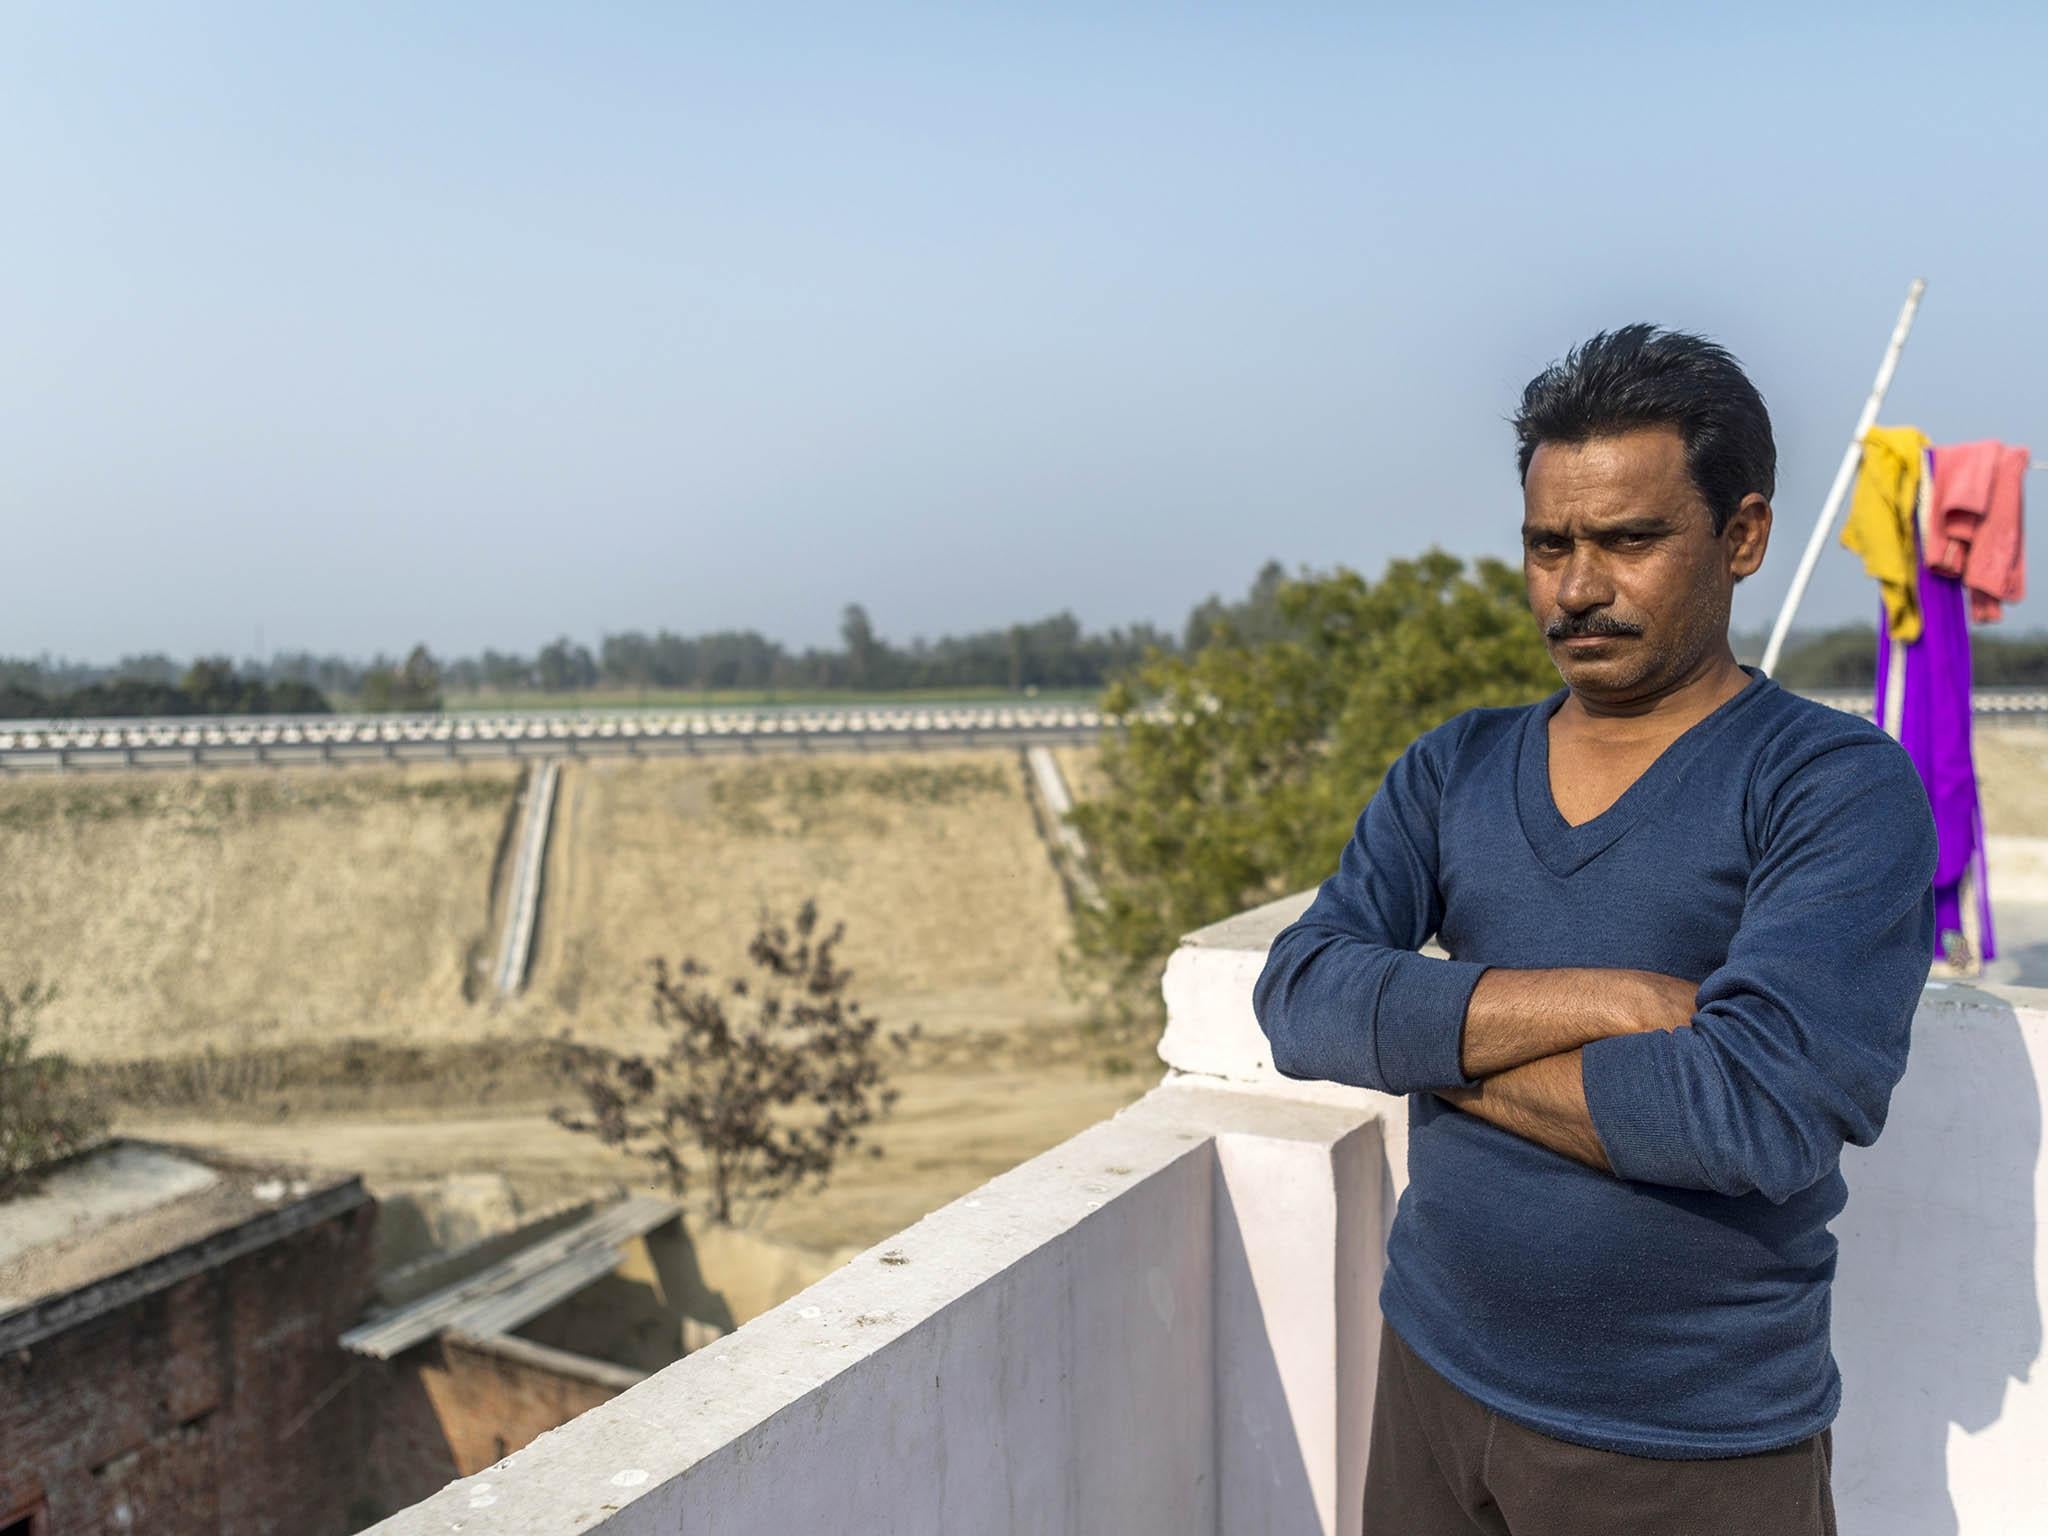 &#13;
Farmer Kailash Singh who sold his land to make way for the construction of the Agra-Lucknow Expressway, in the background, on the outskirts of Lucknow, Uttar Pradesh, India (Bloomberg/Getty)&#13;